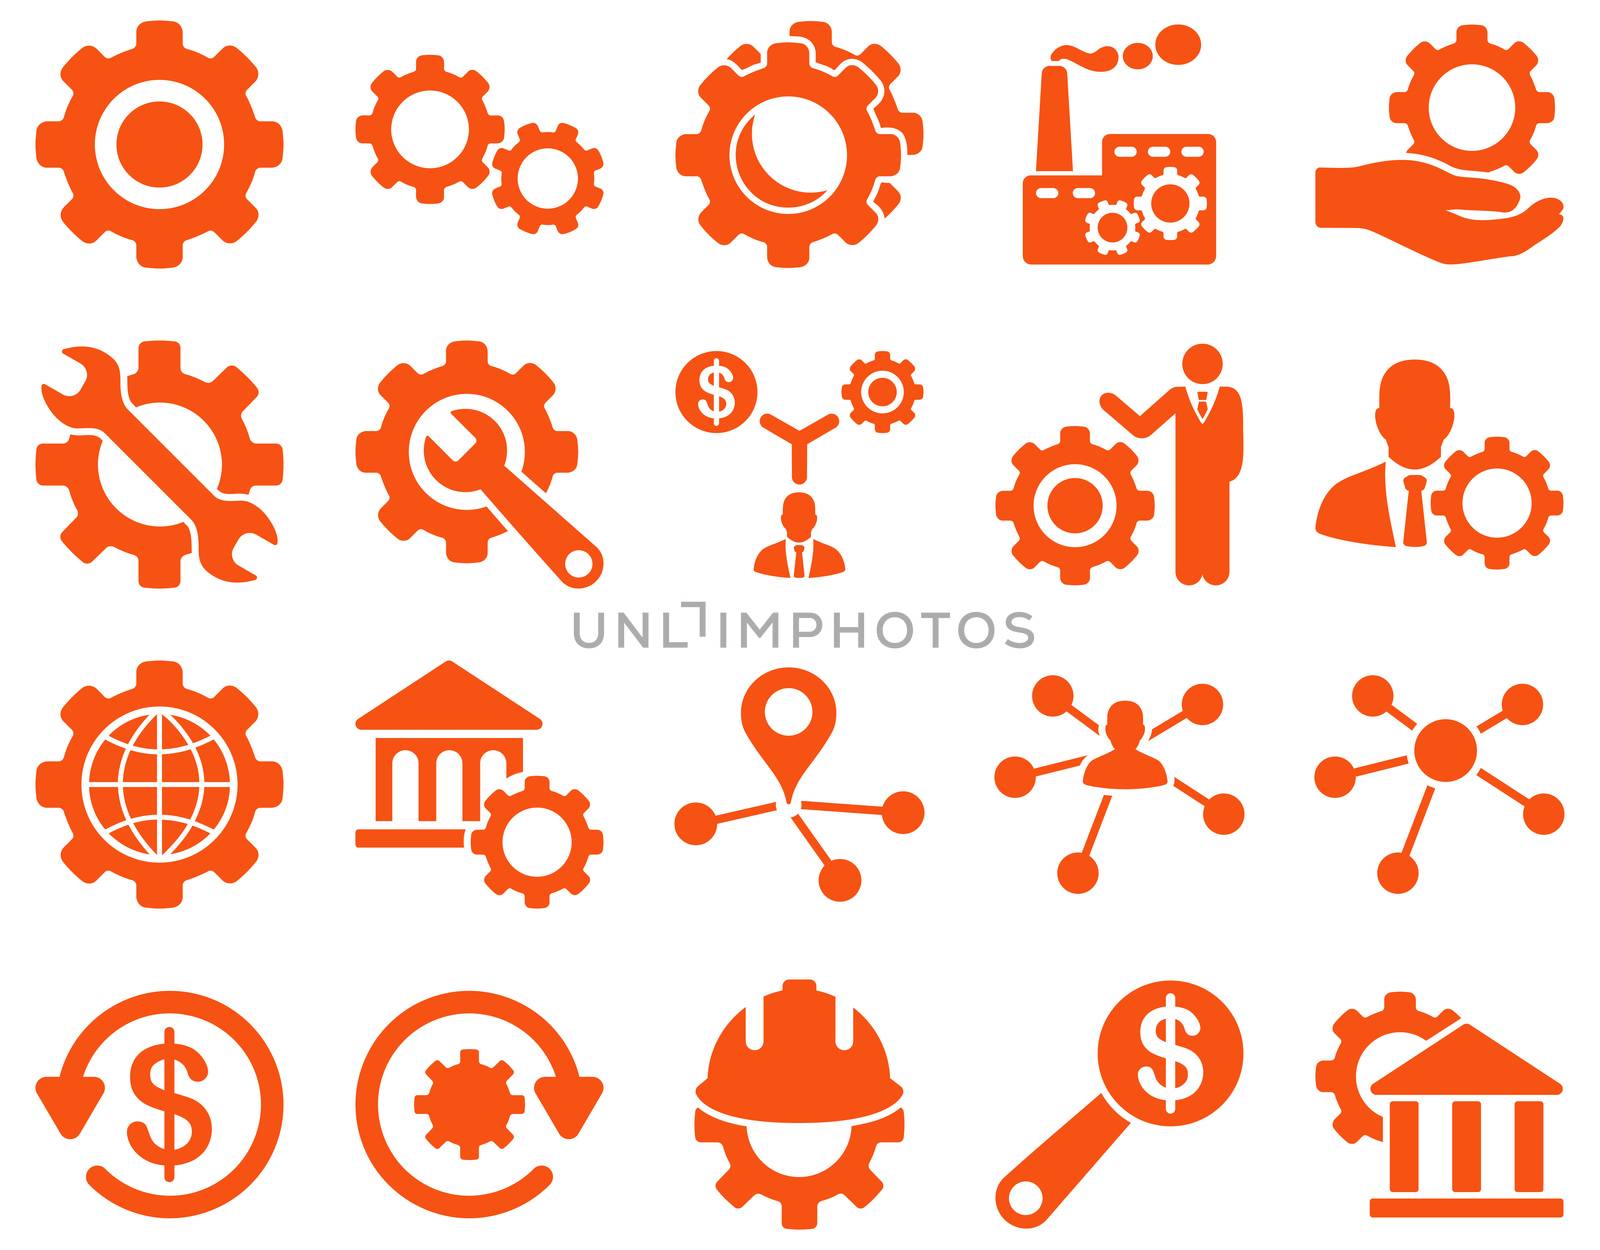 Settings and Tools Icons. Glyph set style is flat images, orange color, isolated on a white background.